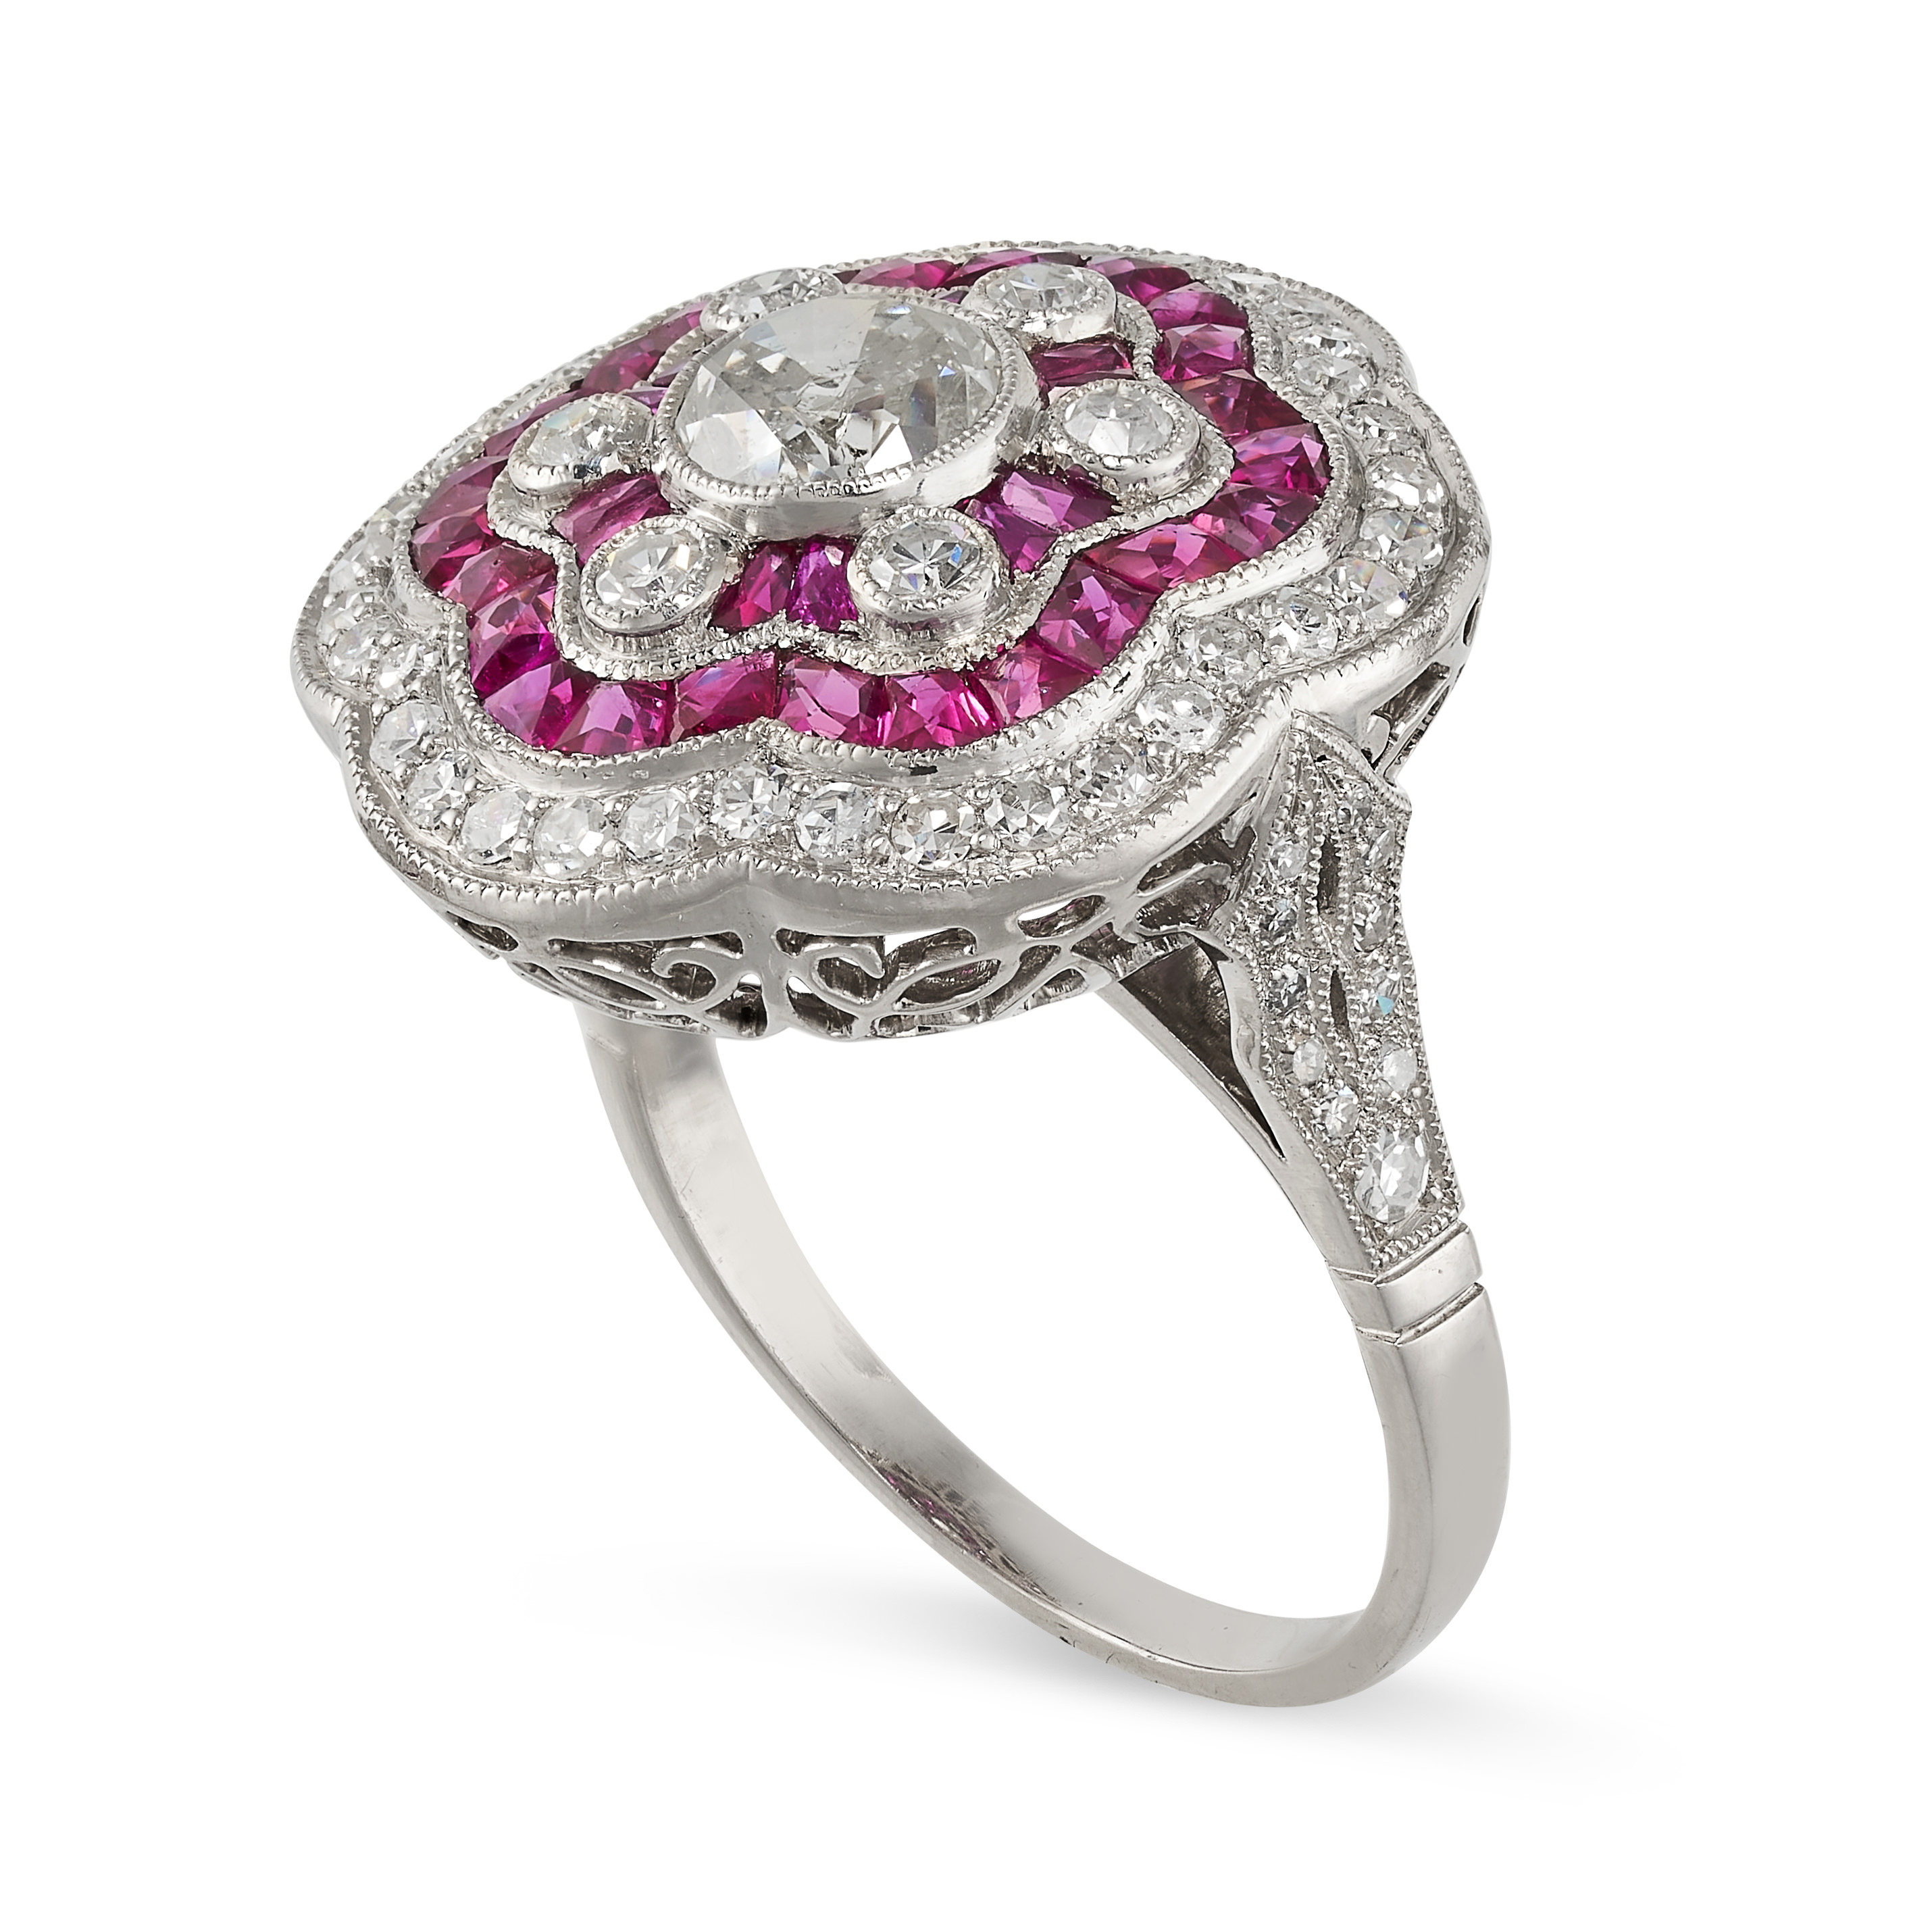 A RUBY AND DIAMOND DRESS RING set with a principal old cut diamond of approximately 0.55 carats in a - Image 2 of 2